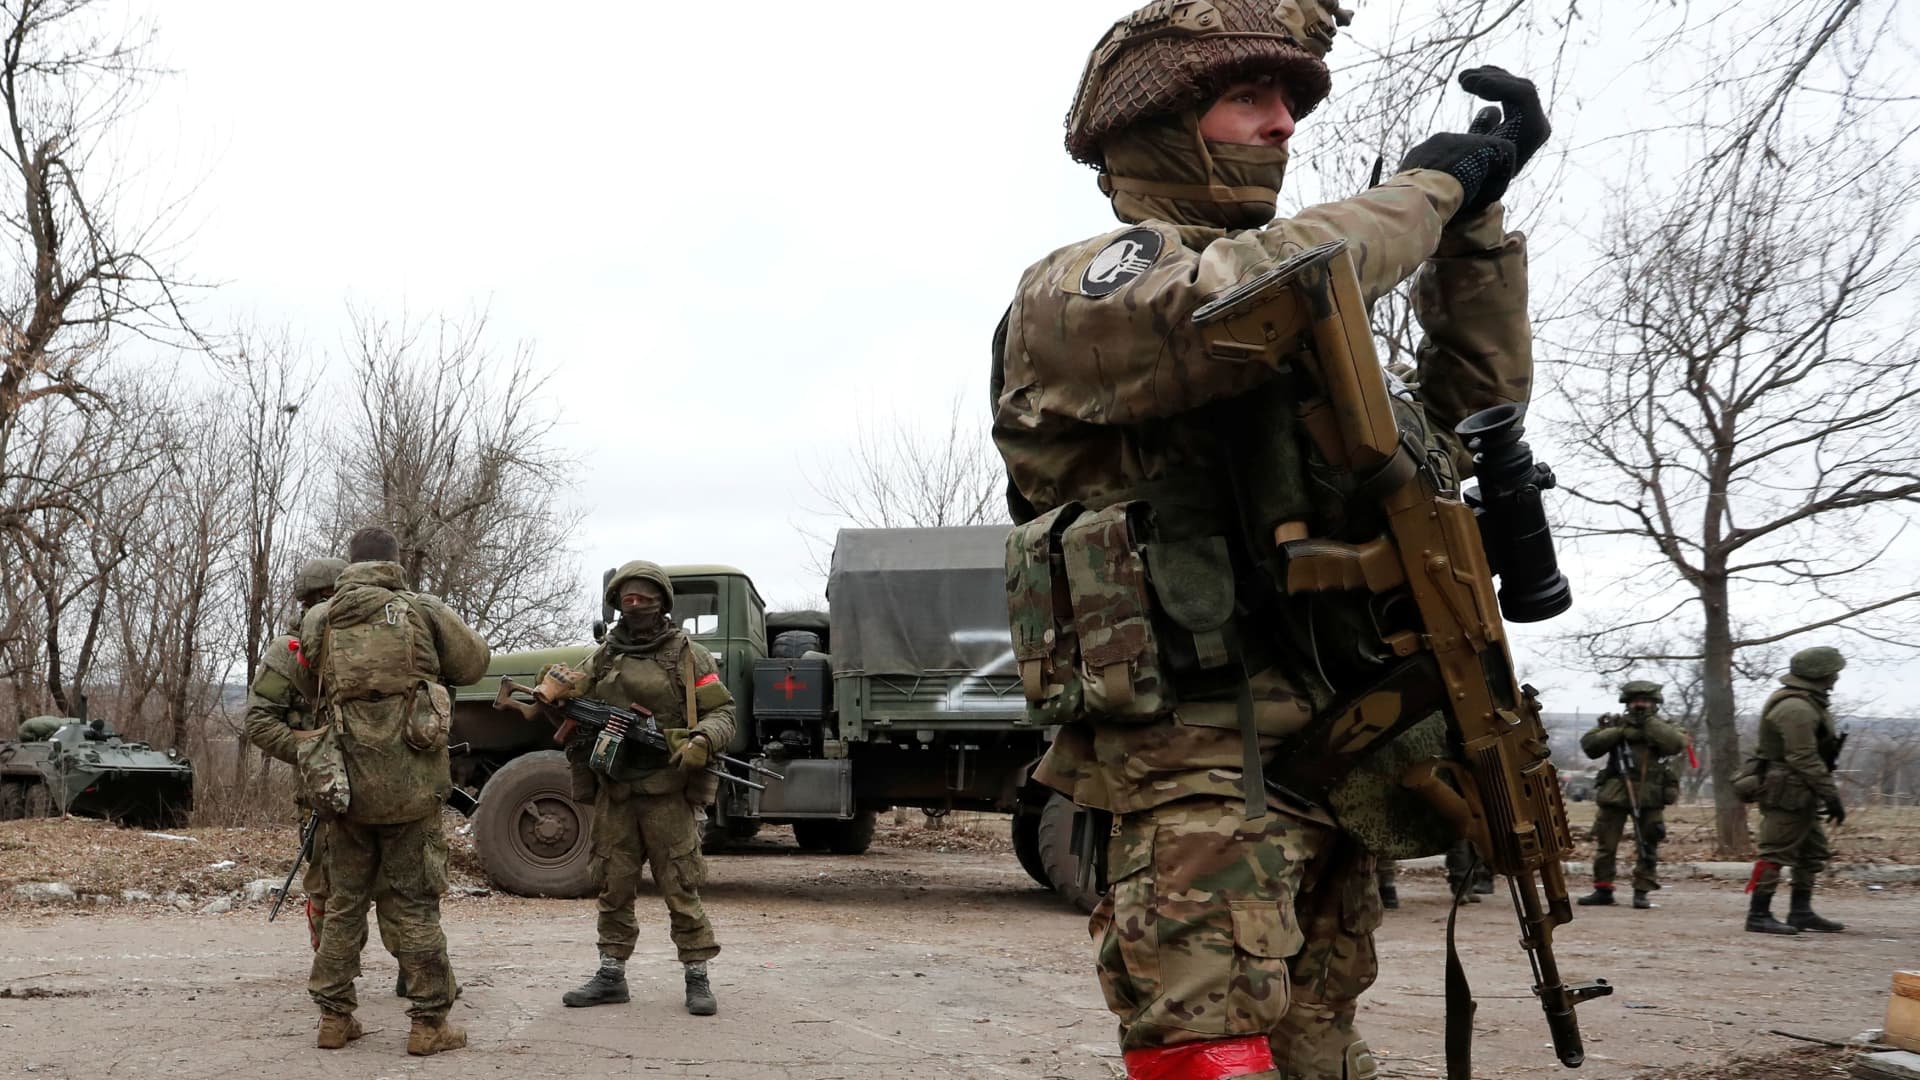 Service members of pro-Russian troops in uniforms without insignia gather in the separatist-controlled settlement of Mykolaivka (Nikolaevka), as Russia's invasion of Ukraine continues, in the Donetsk region, Ukraine March 1, 2022.